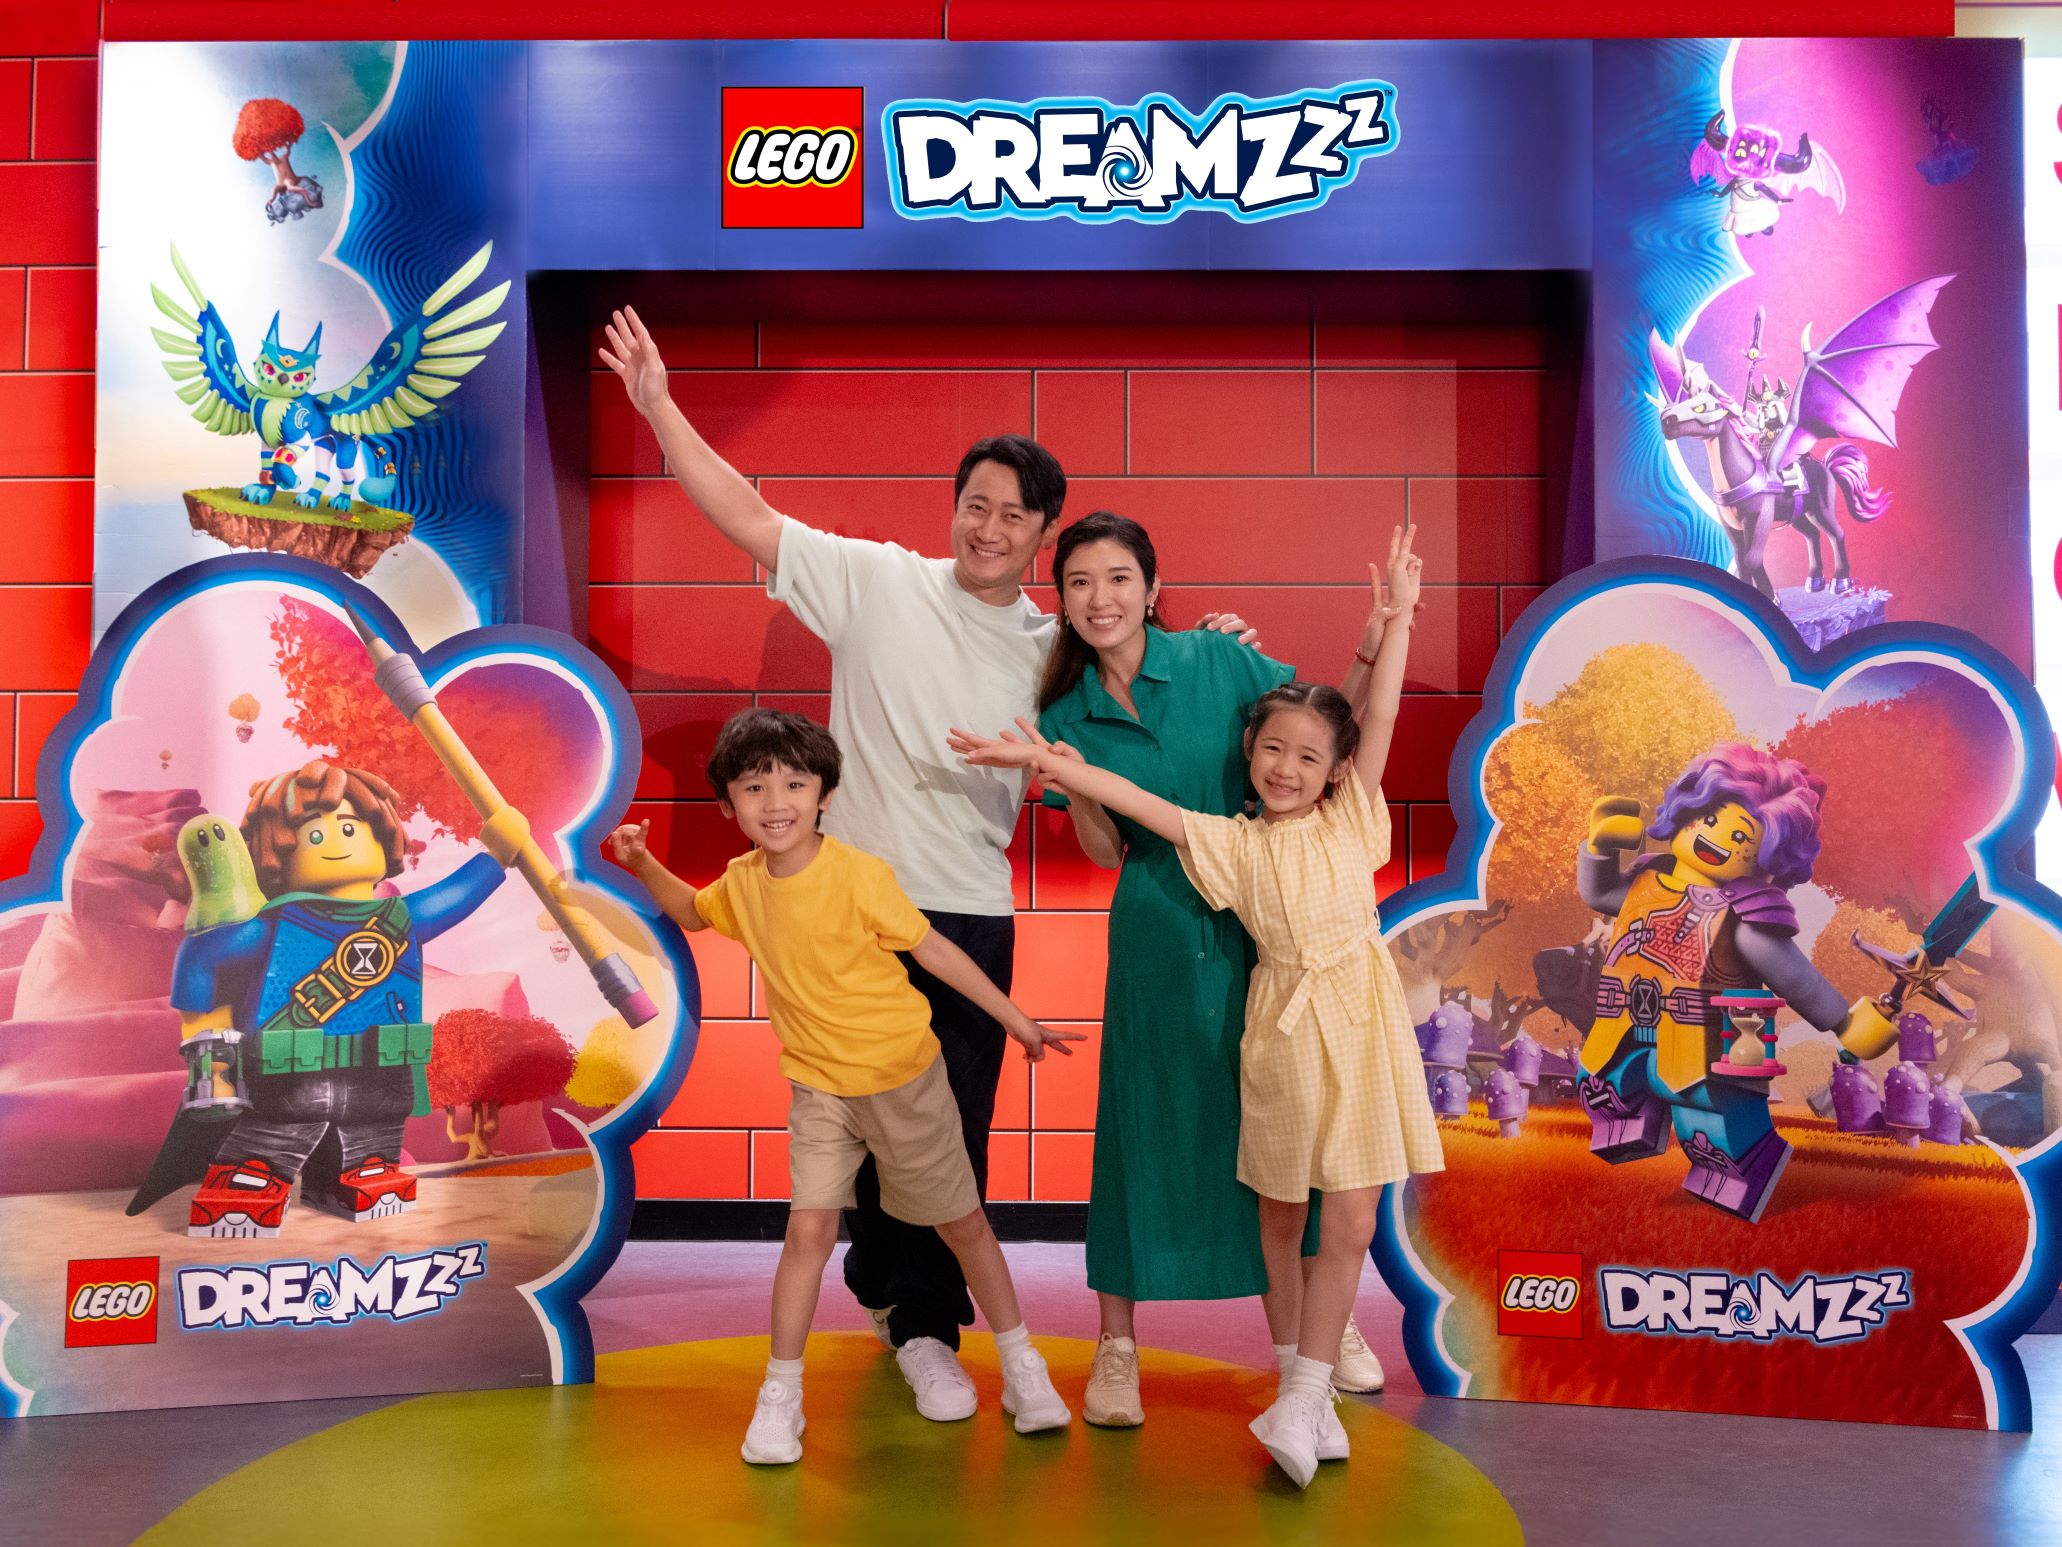 Step Into The Dream World with LEGO DREAMZzz